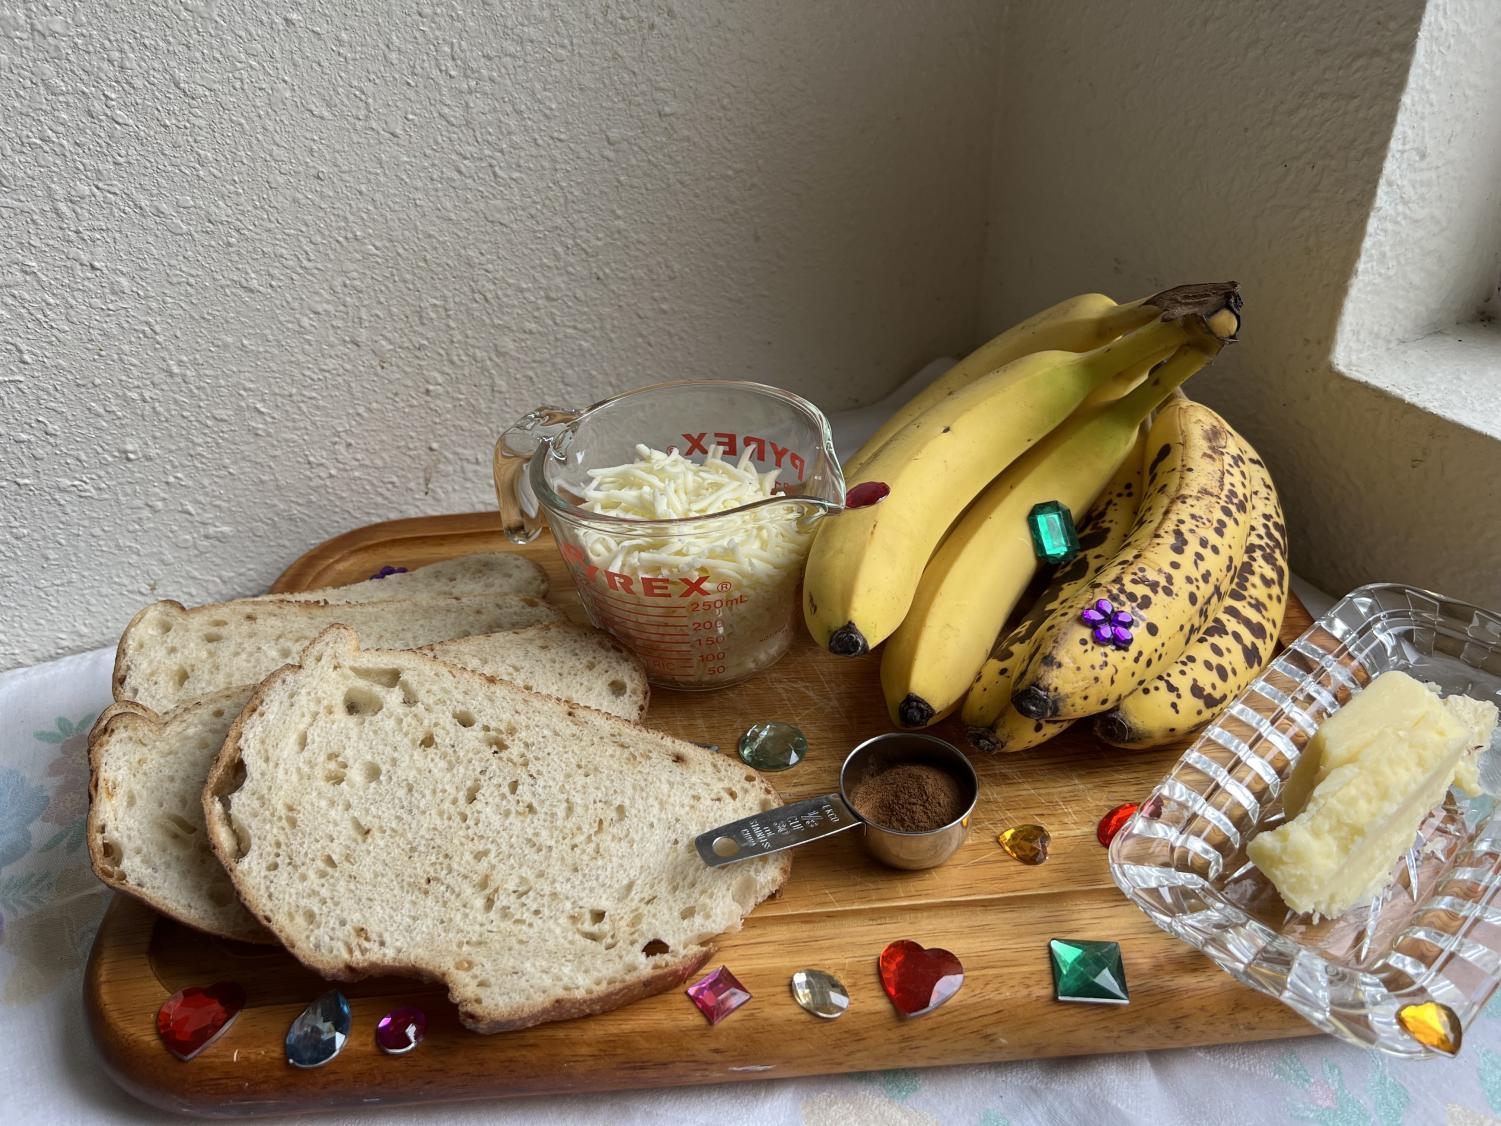 bananas mozzarella bread butter and cinnamon on cutting board with colorful gems